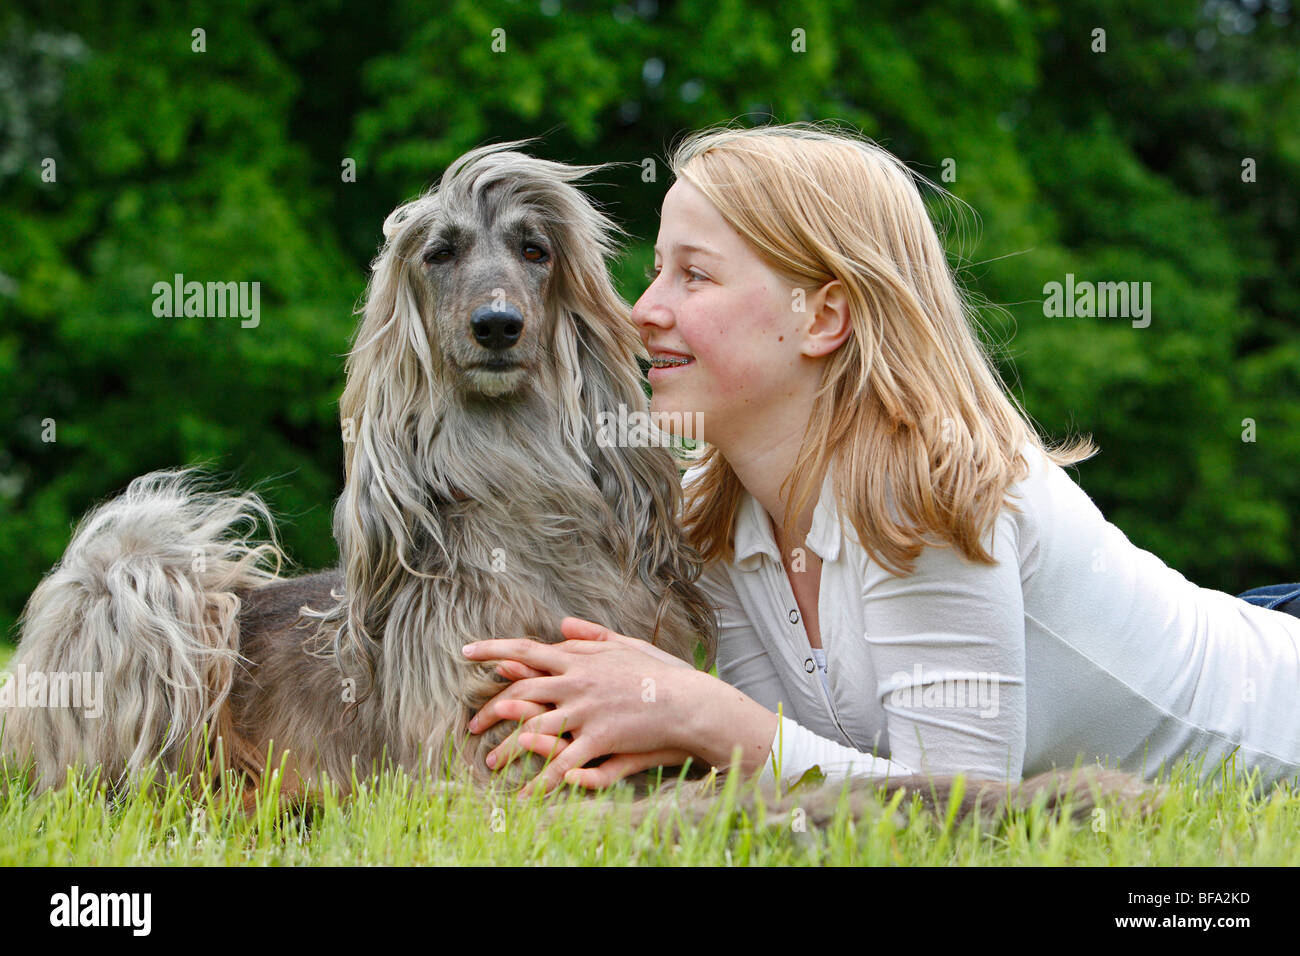 Afghanistan Hound, Afghan Hound (Canis lupus f. familiaris), girl lying in a meadow beside a dog smiling happily Stock Photo